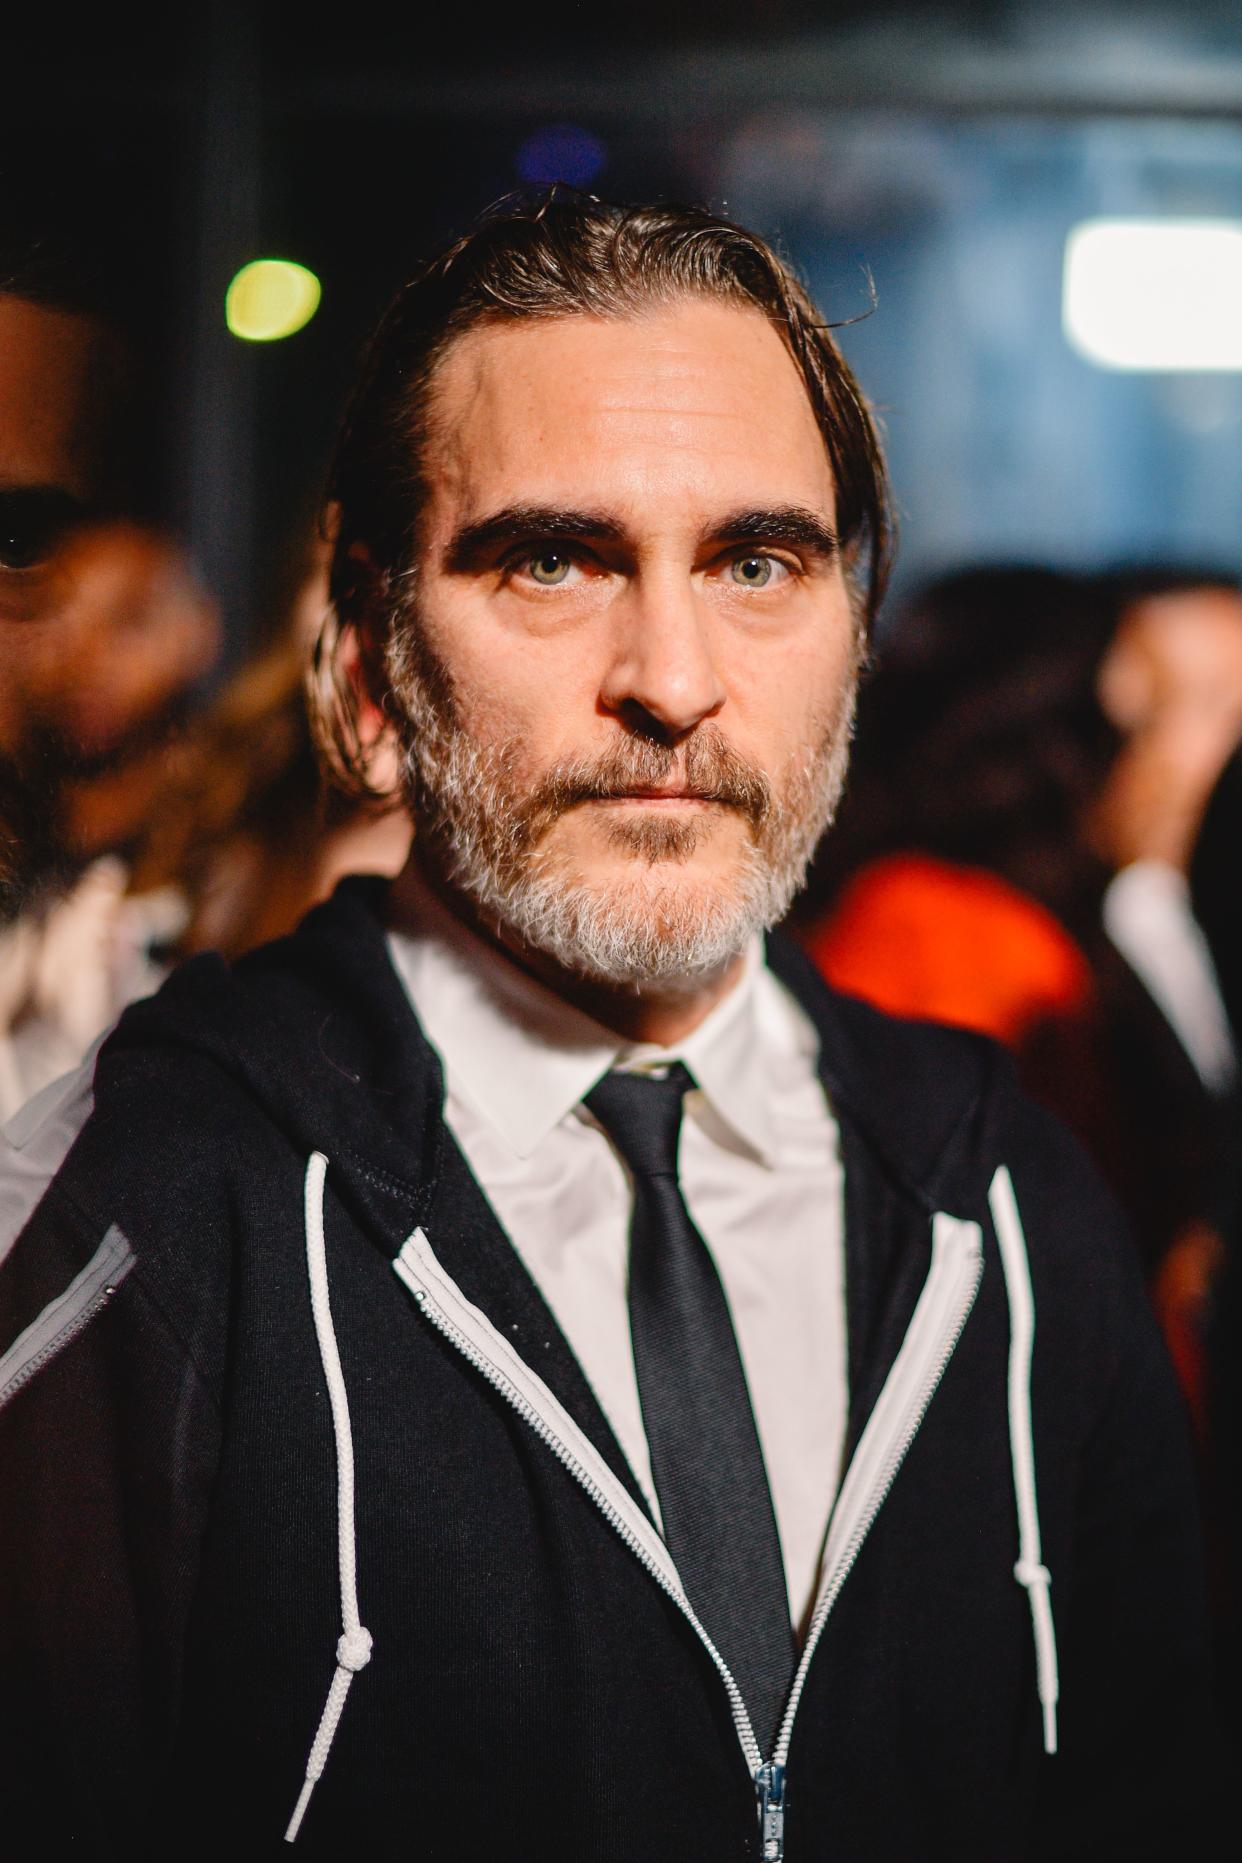 Age has nothing on Joaquin Phoenix as he looks amazing in a T-shirt and tie, with a black sweatshirt.